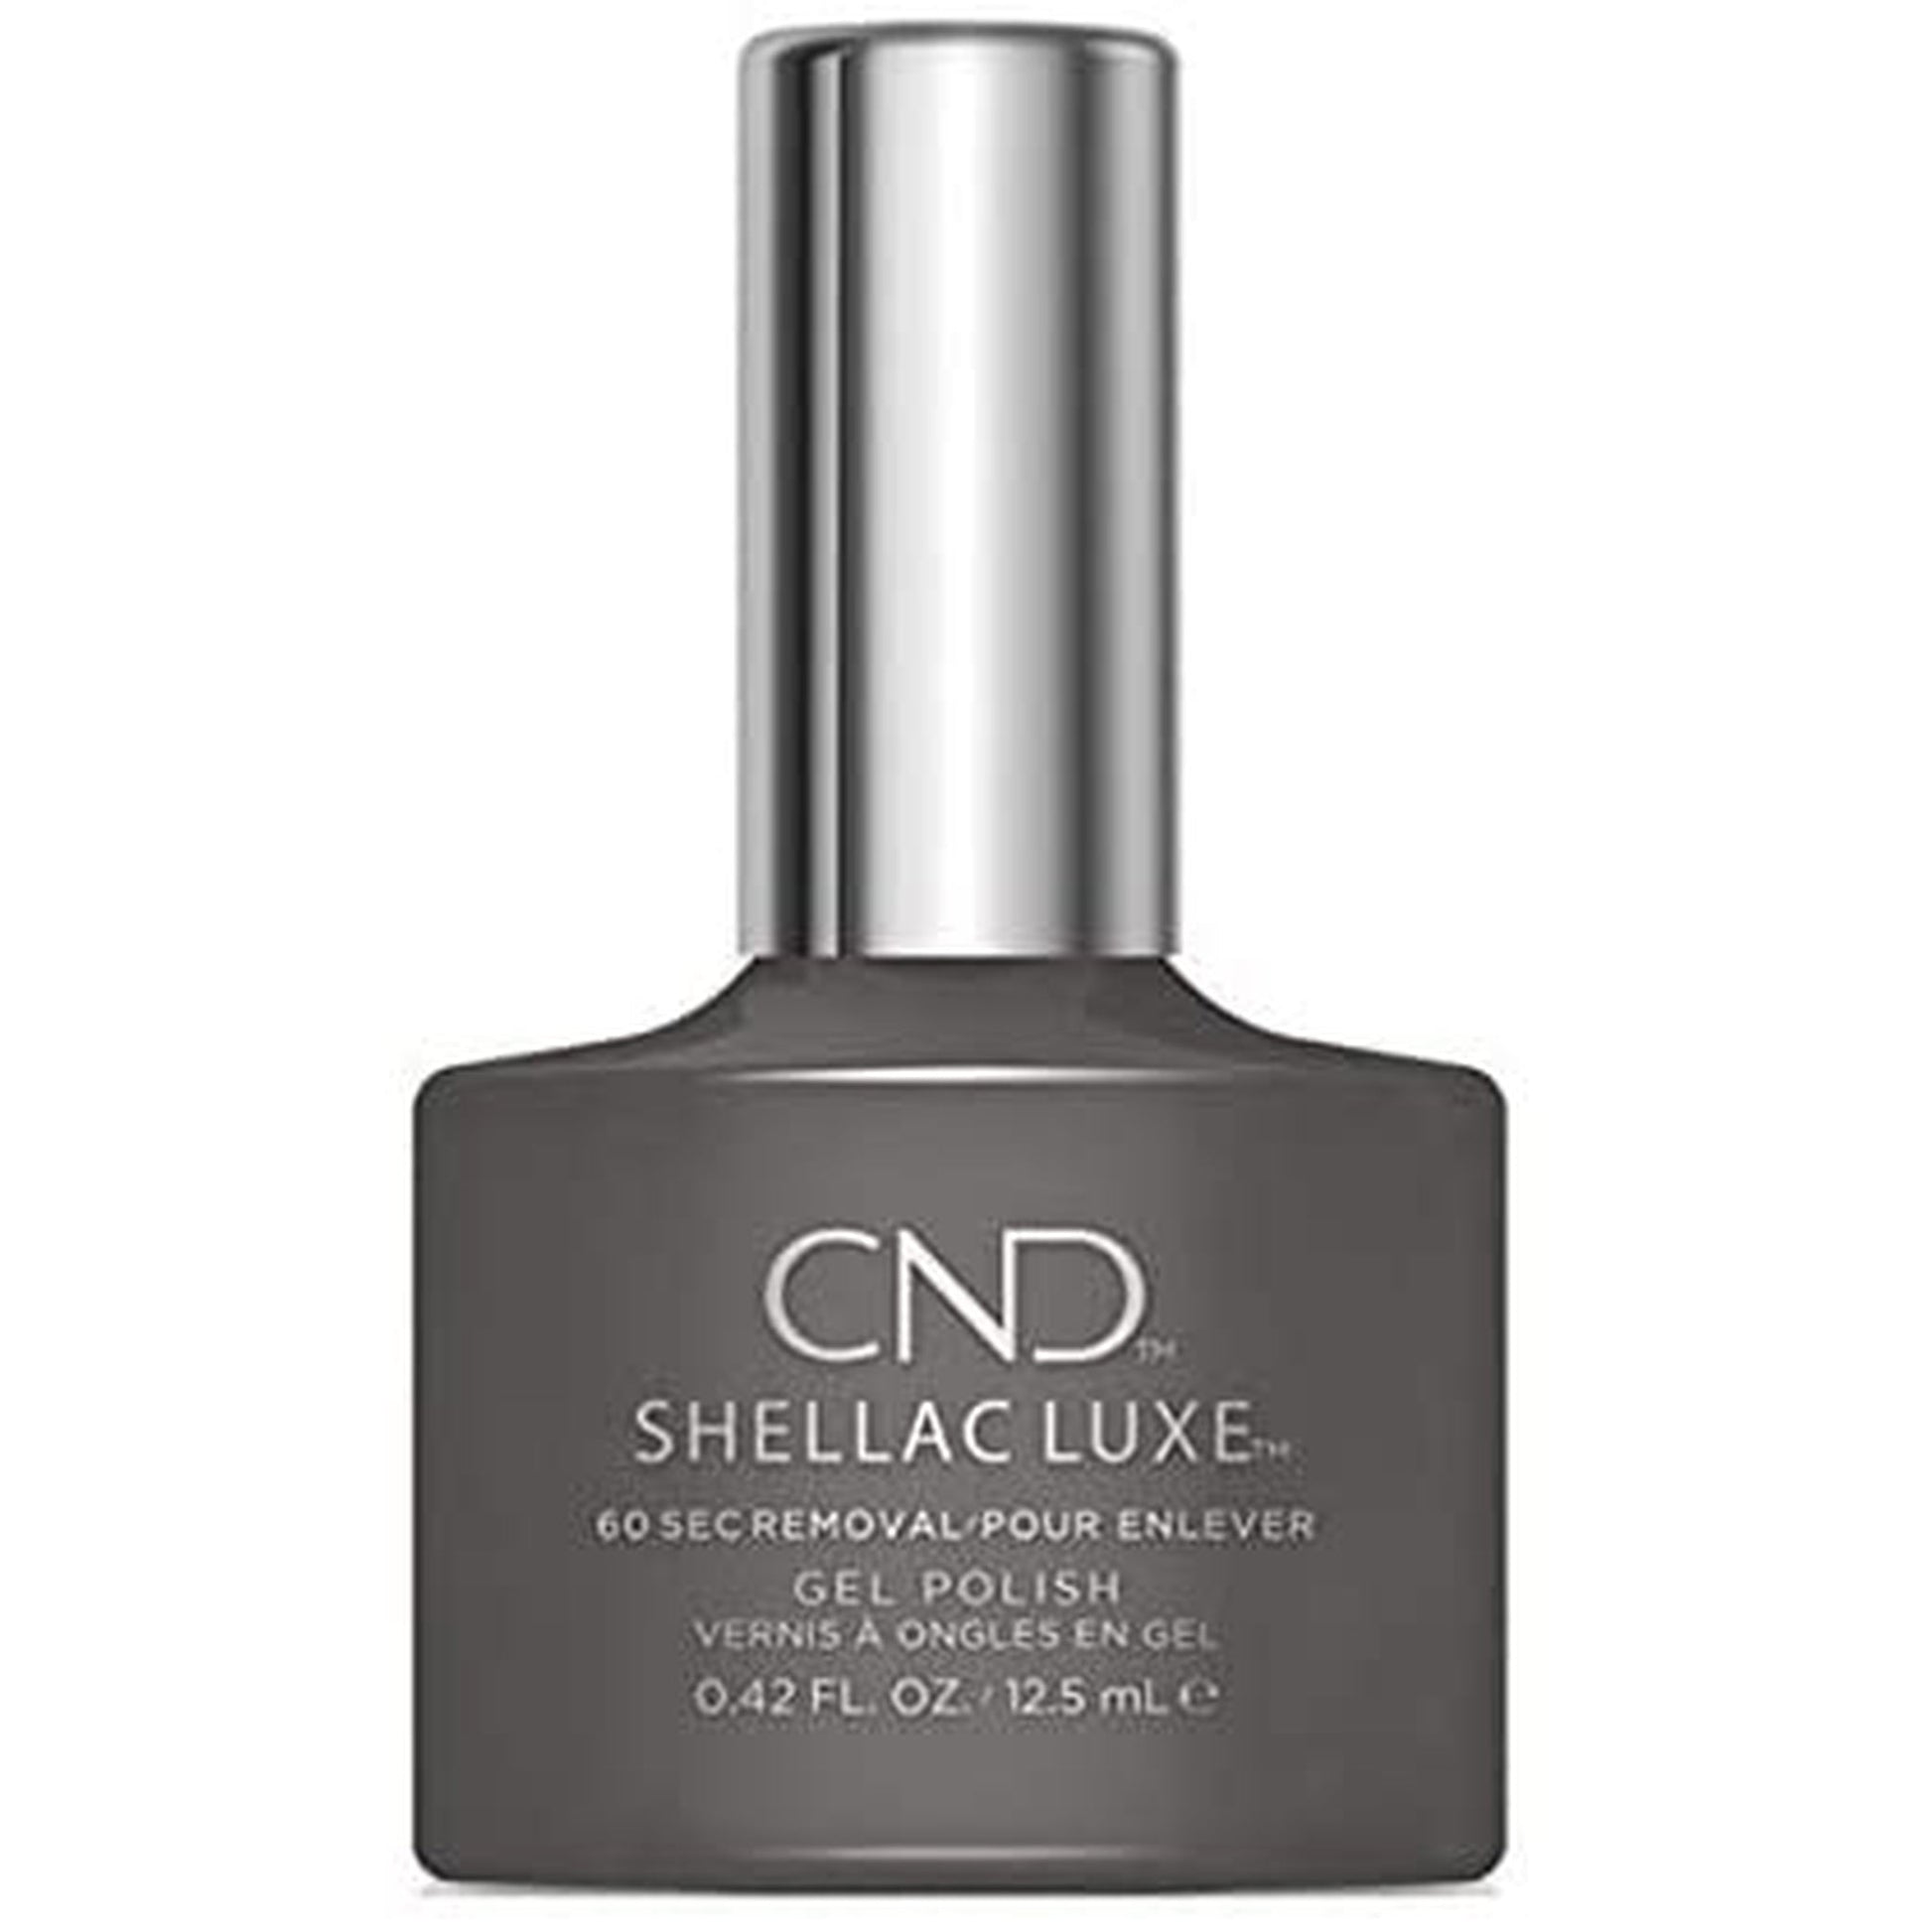 CND Shellac Luxe Gel Polish Silhouette #296-CND-BeautyNmakeup.co.uk